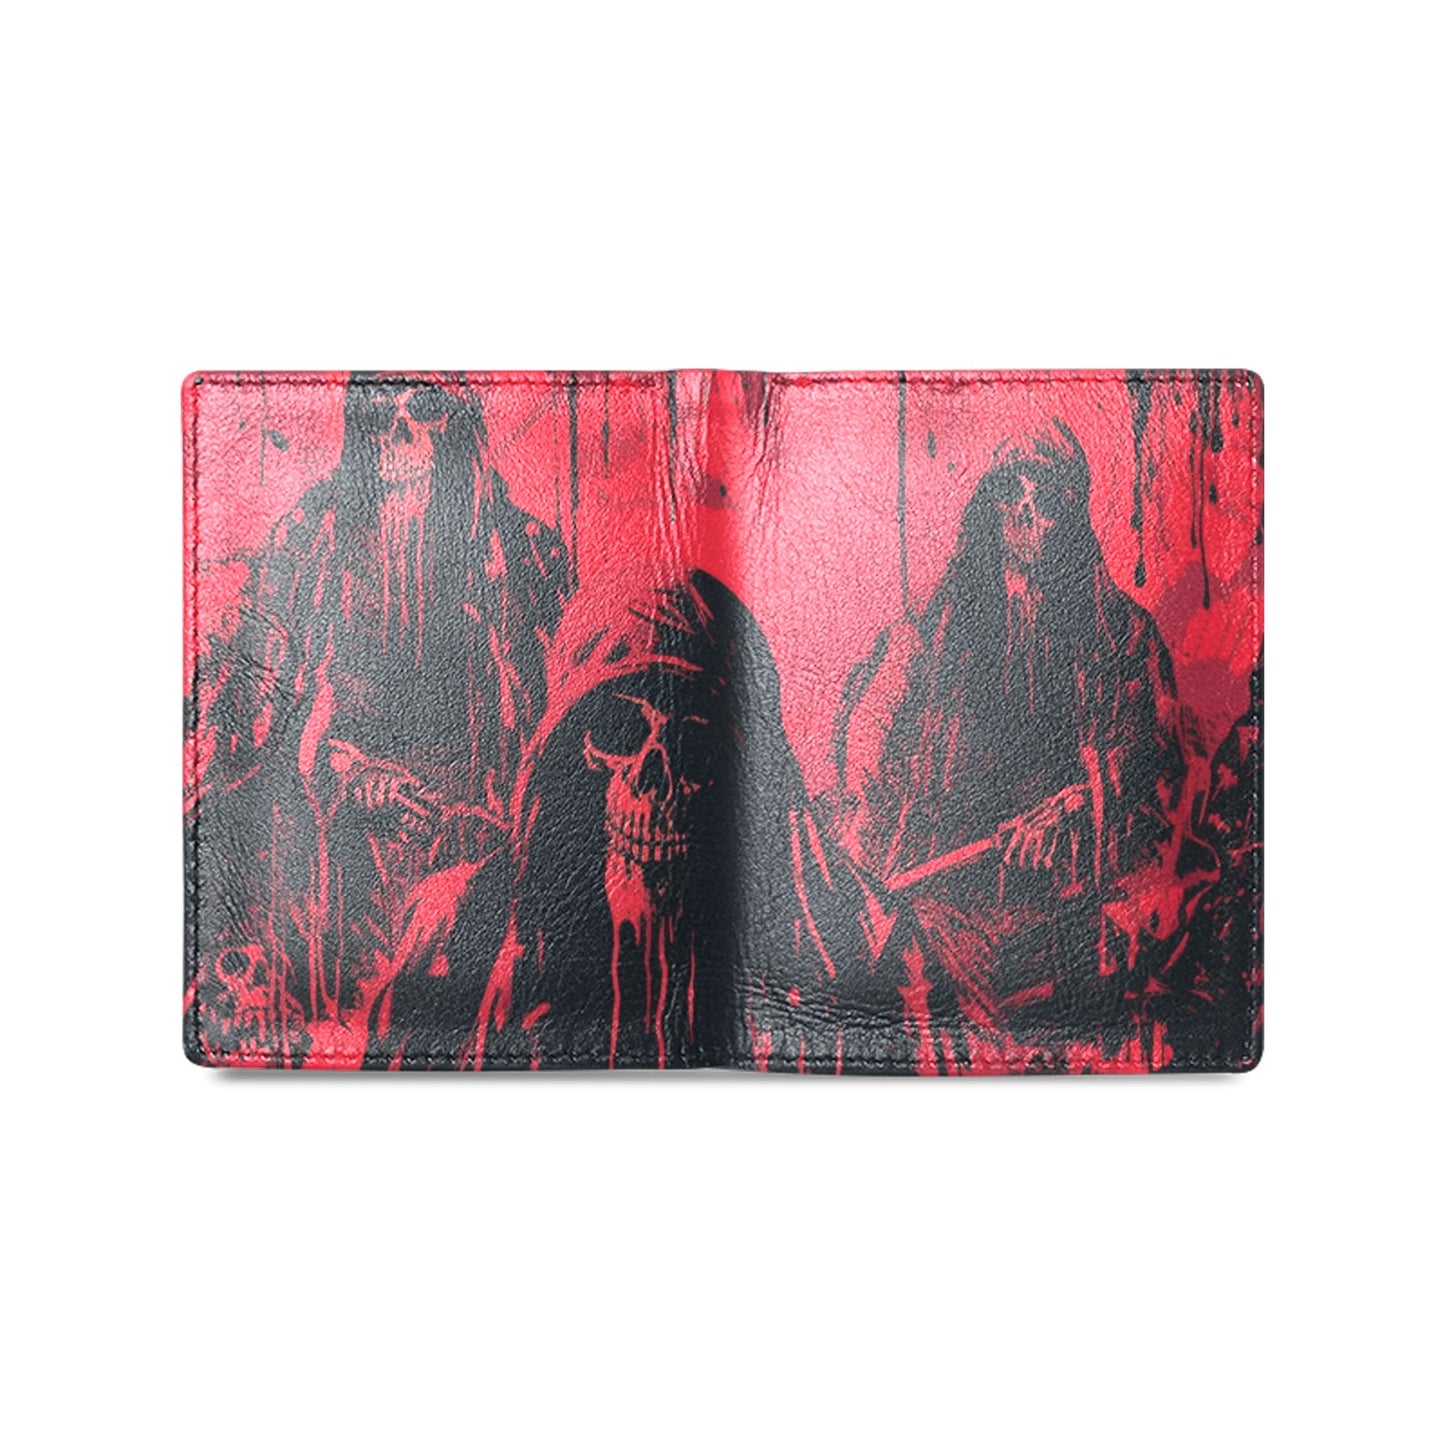 The Grim Reaper Leather Wallet